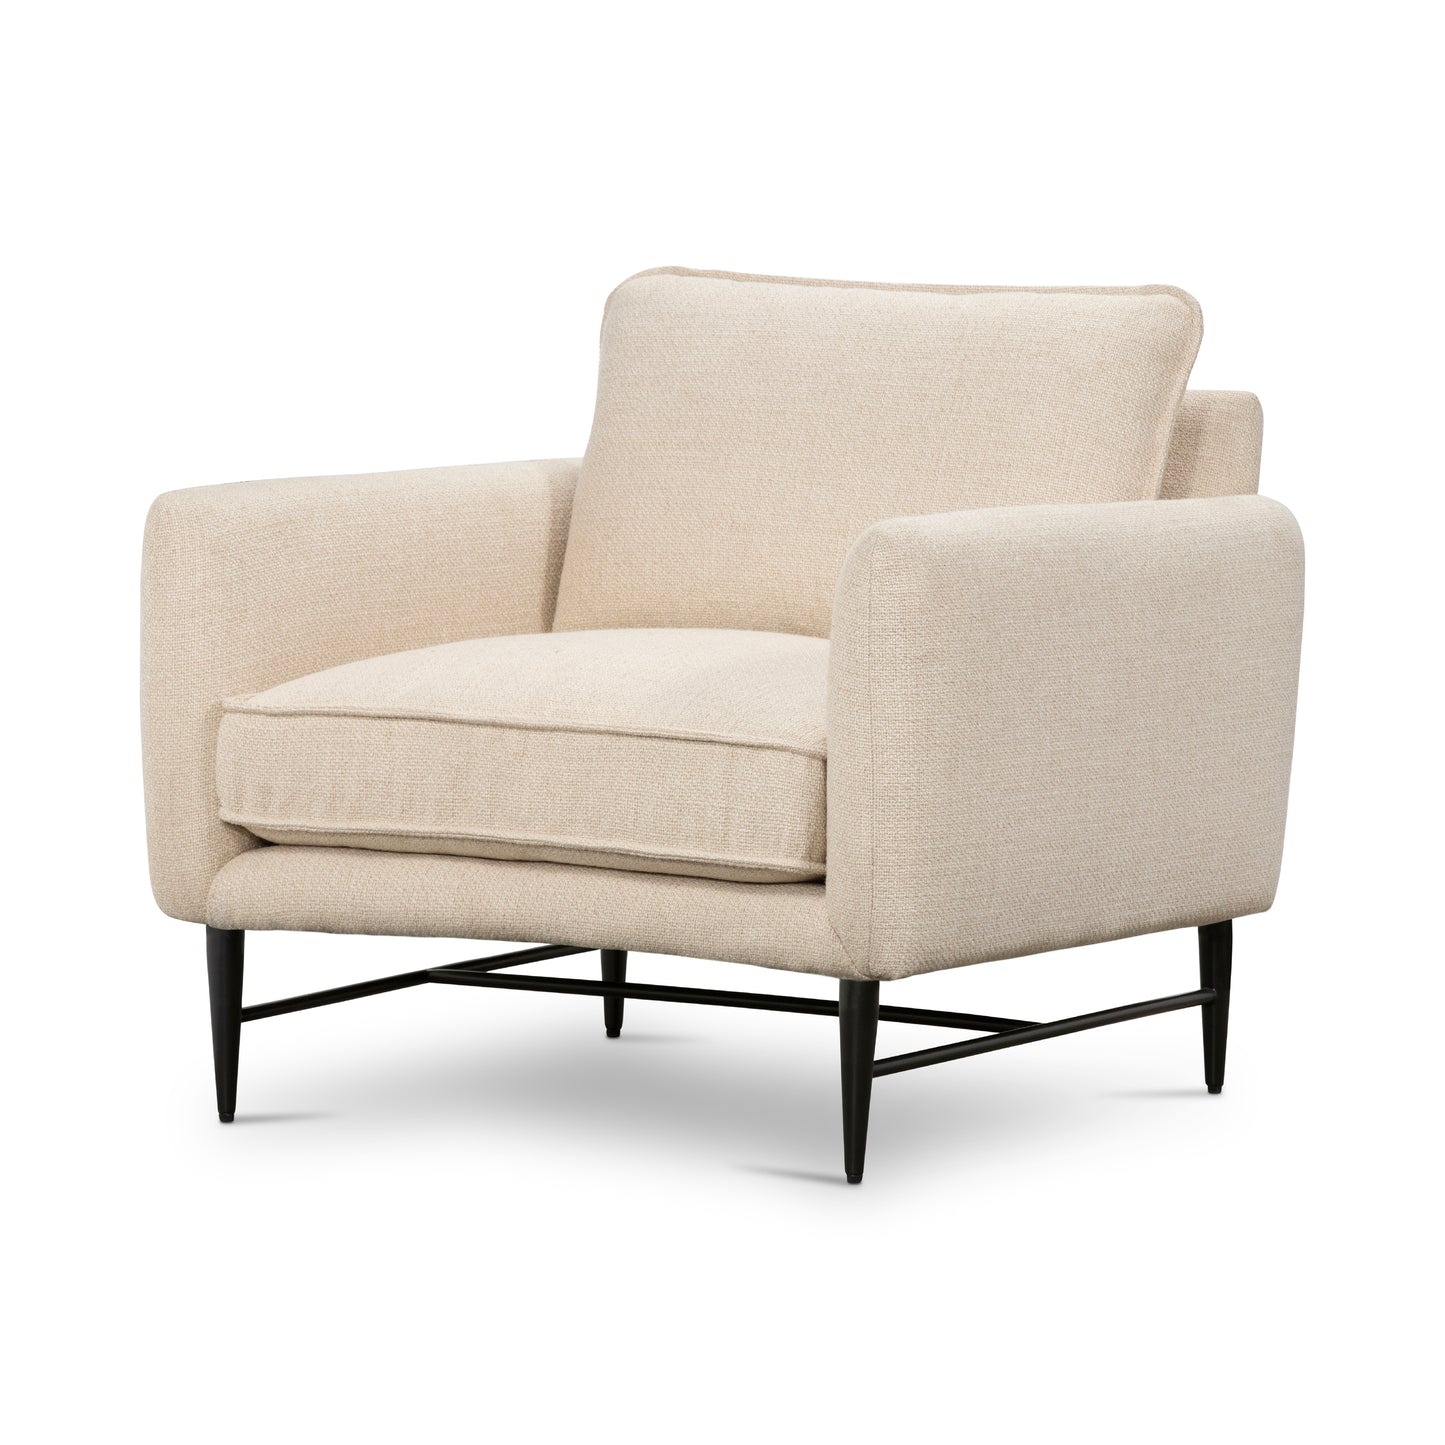 Load image into Gallery viewer, Delaney Chair Irving FlaxLounge Chair Four Hands  Irving Flax   Four Hands, Mid Century Modern Furniture, Old Bones Furniture Company, Old Bones Co, Modern Mid Century, Designer Furniture, https://www.oldbonesco.com/
